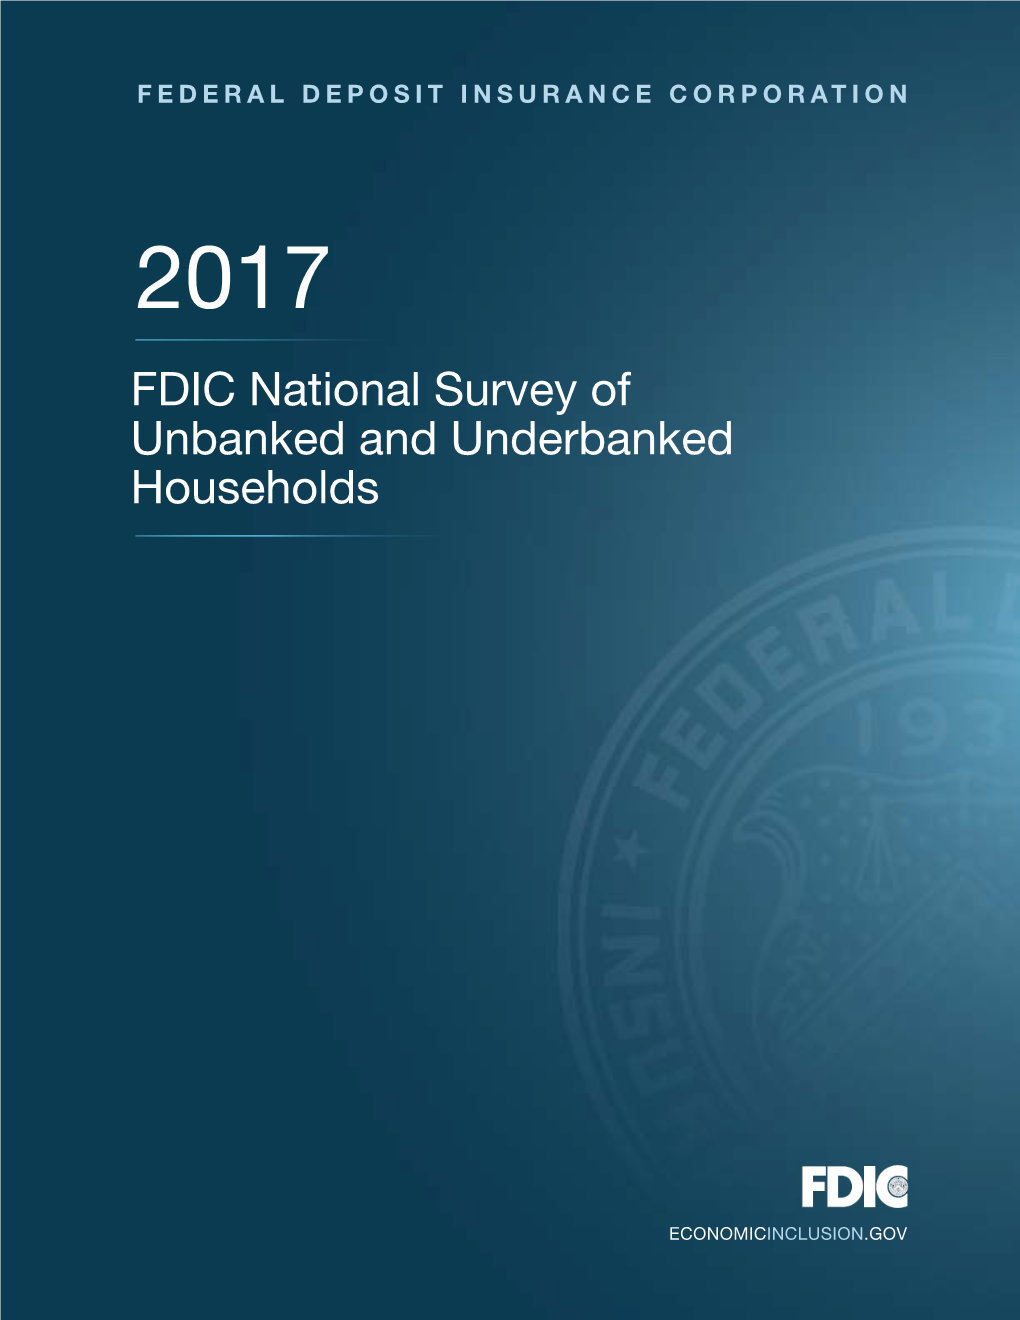 2017 FDIC National Survey of Unbanked and Underbanked Households